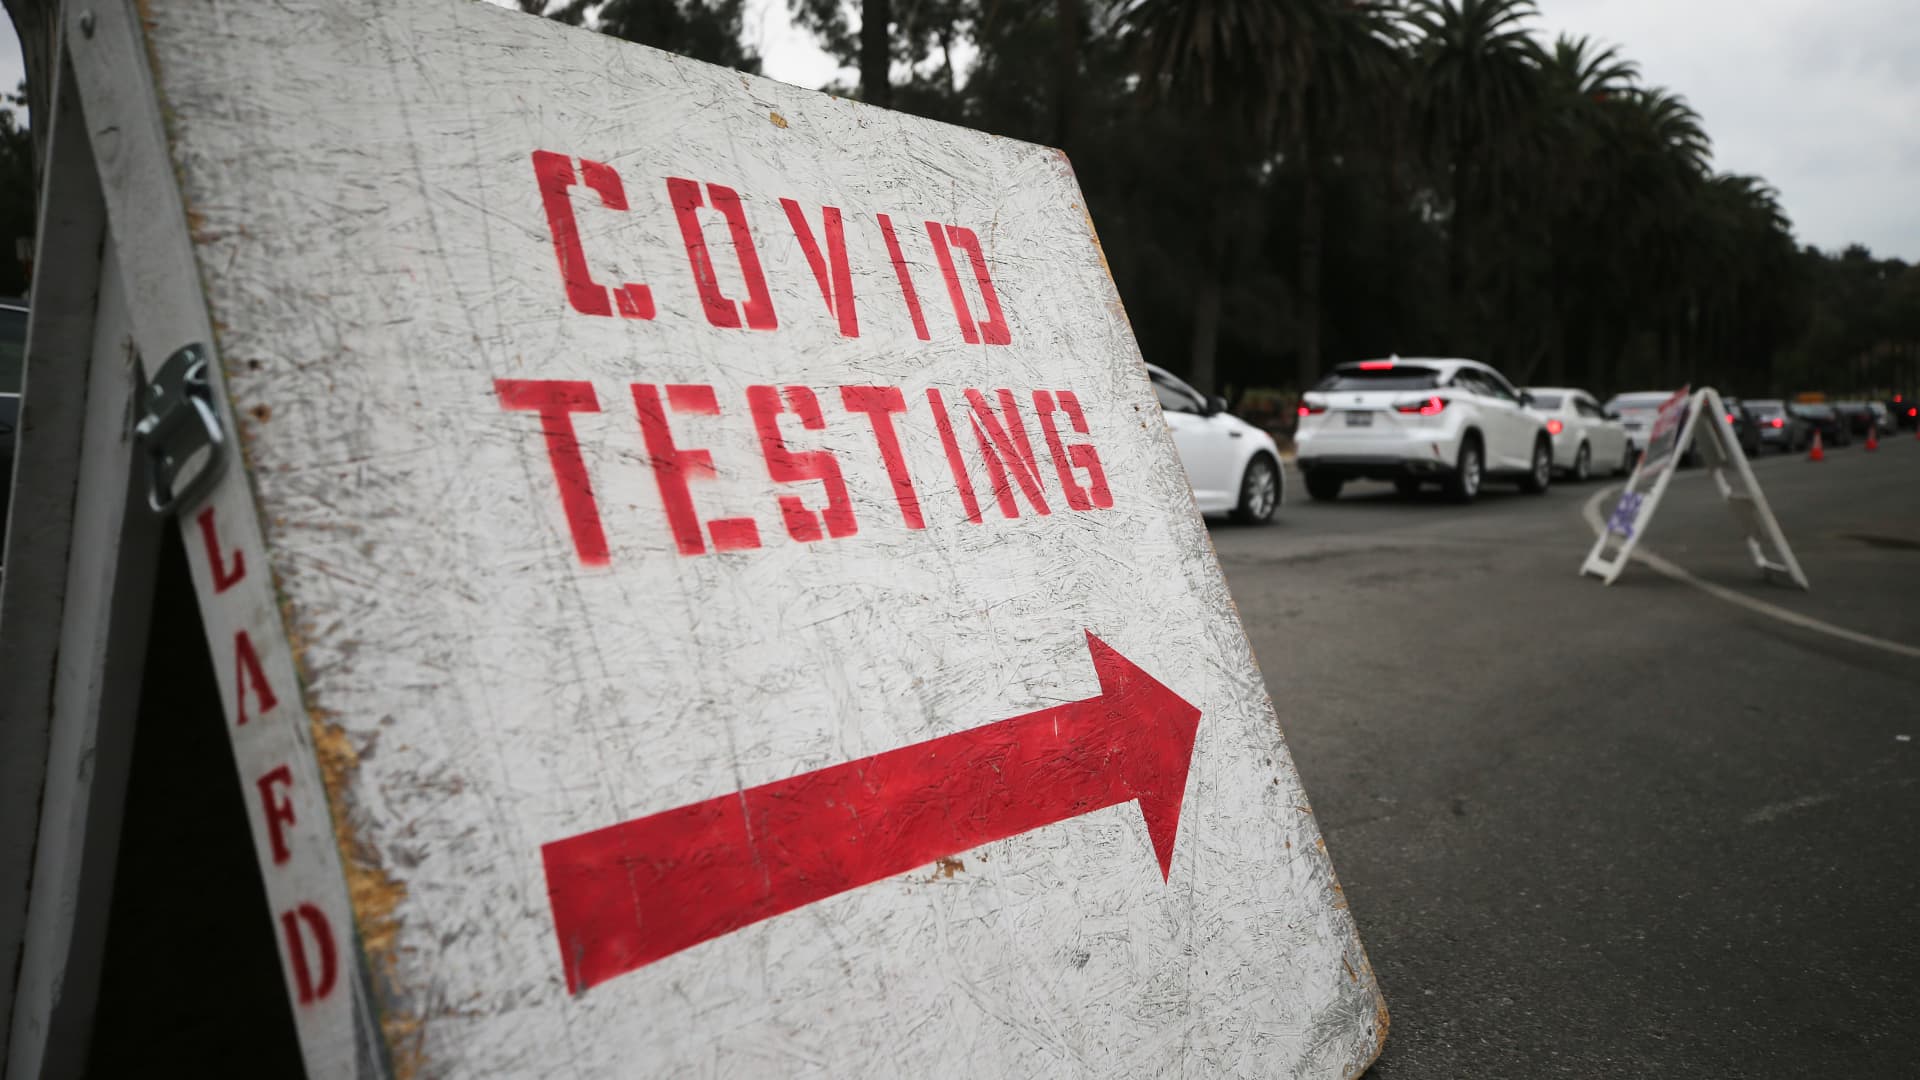 Vehicles line up to enter a COVID-19 testing site at Dodger Stadium on the first day of new stay-at-home orders on December 7, 2020 in Los Angeles, California.